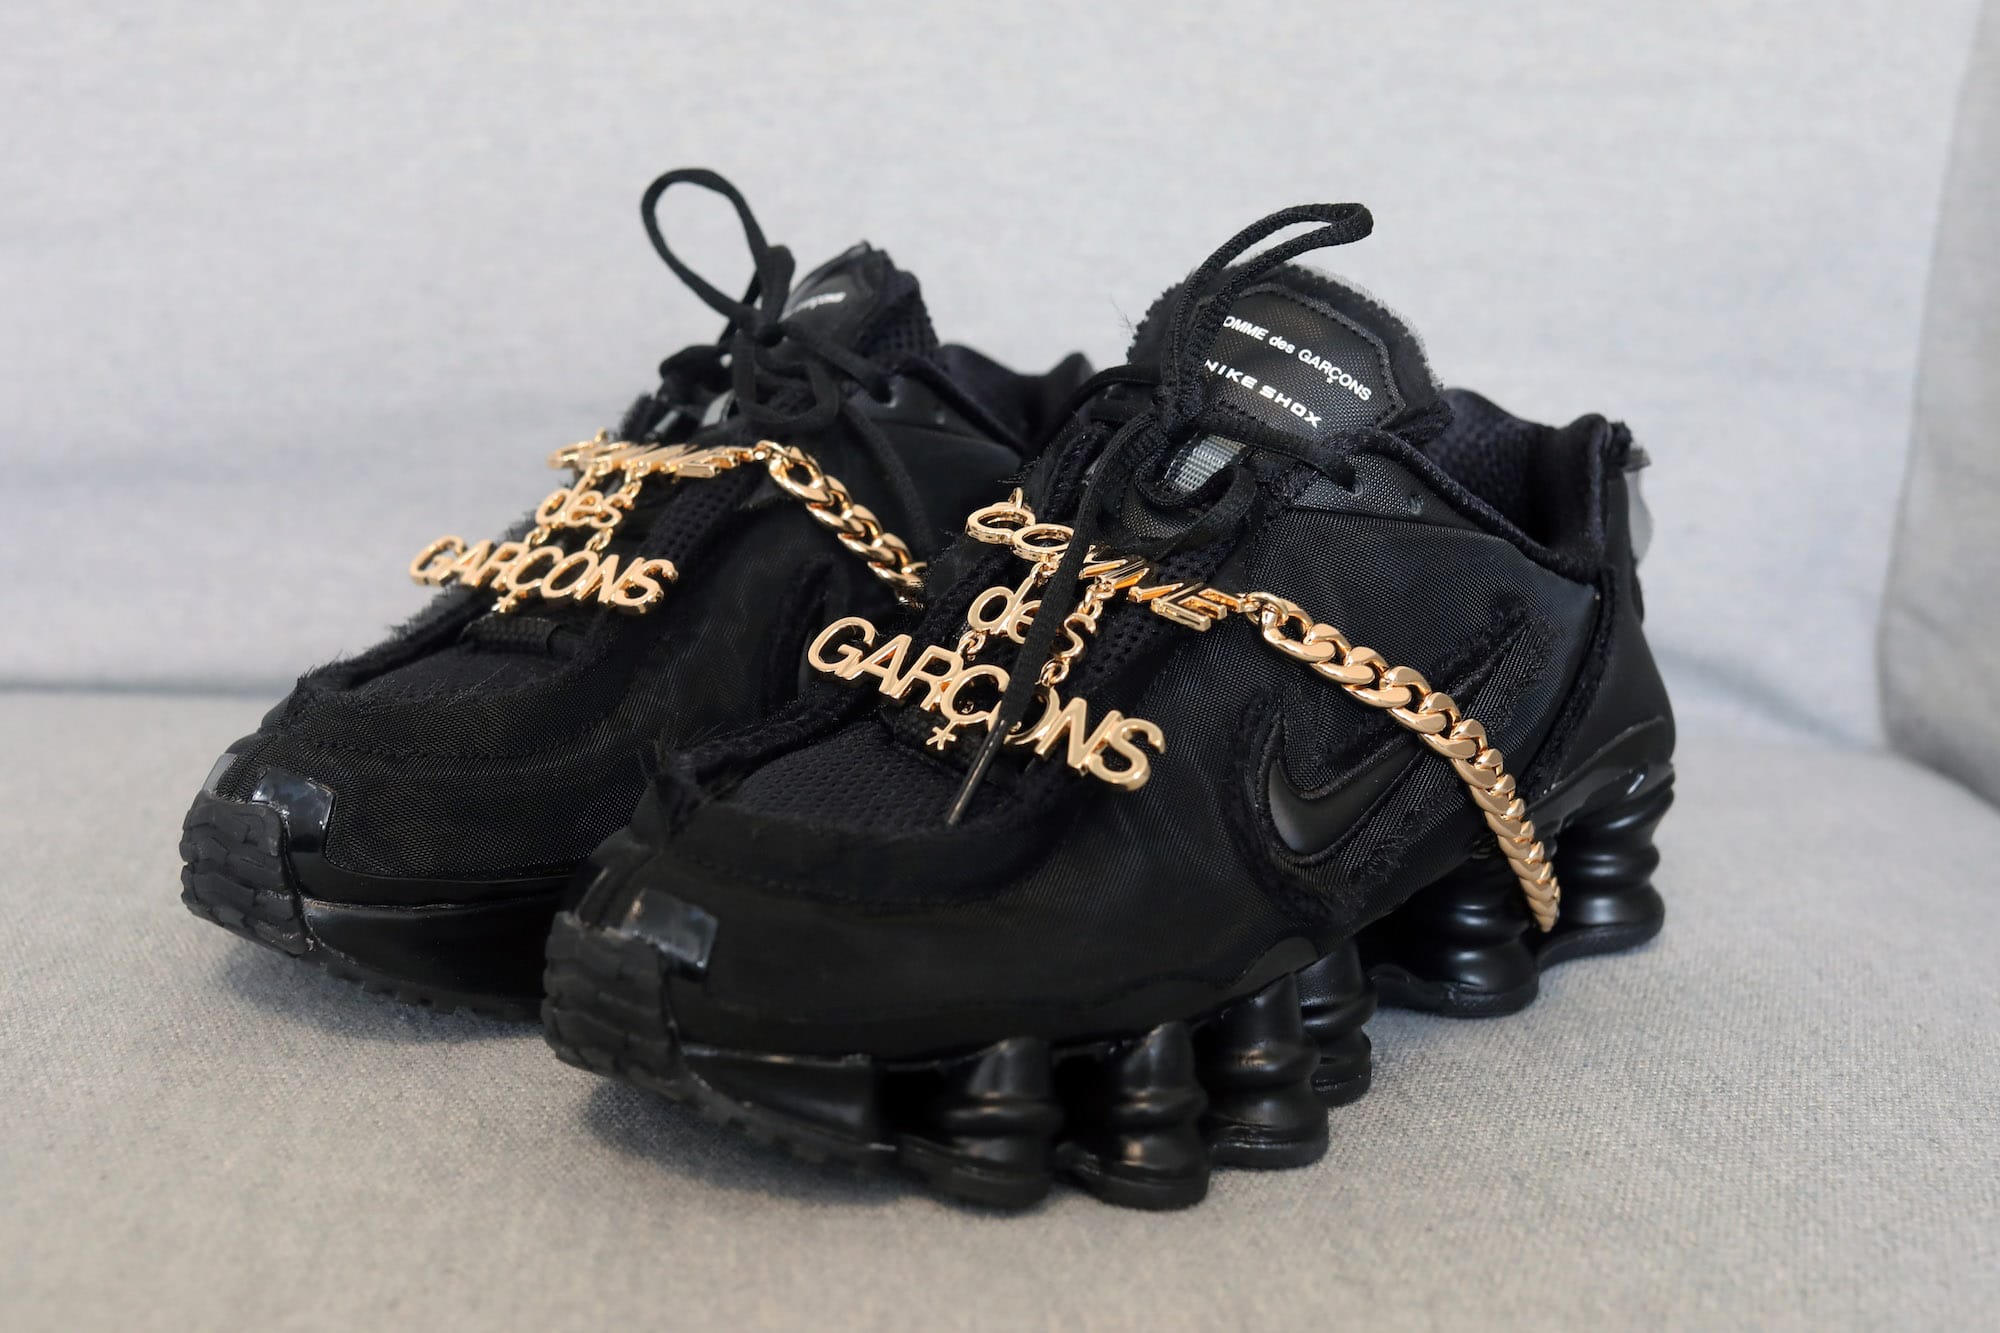 cdg chain shoes